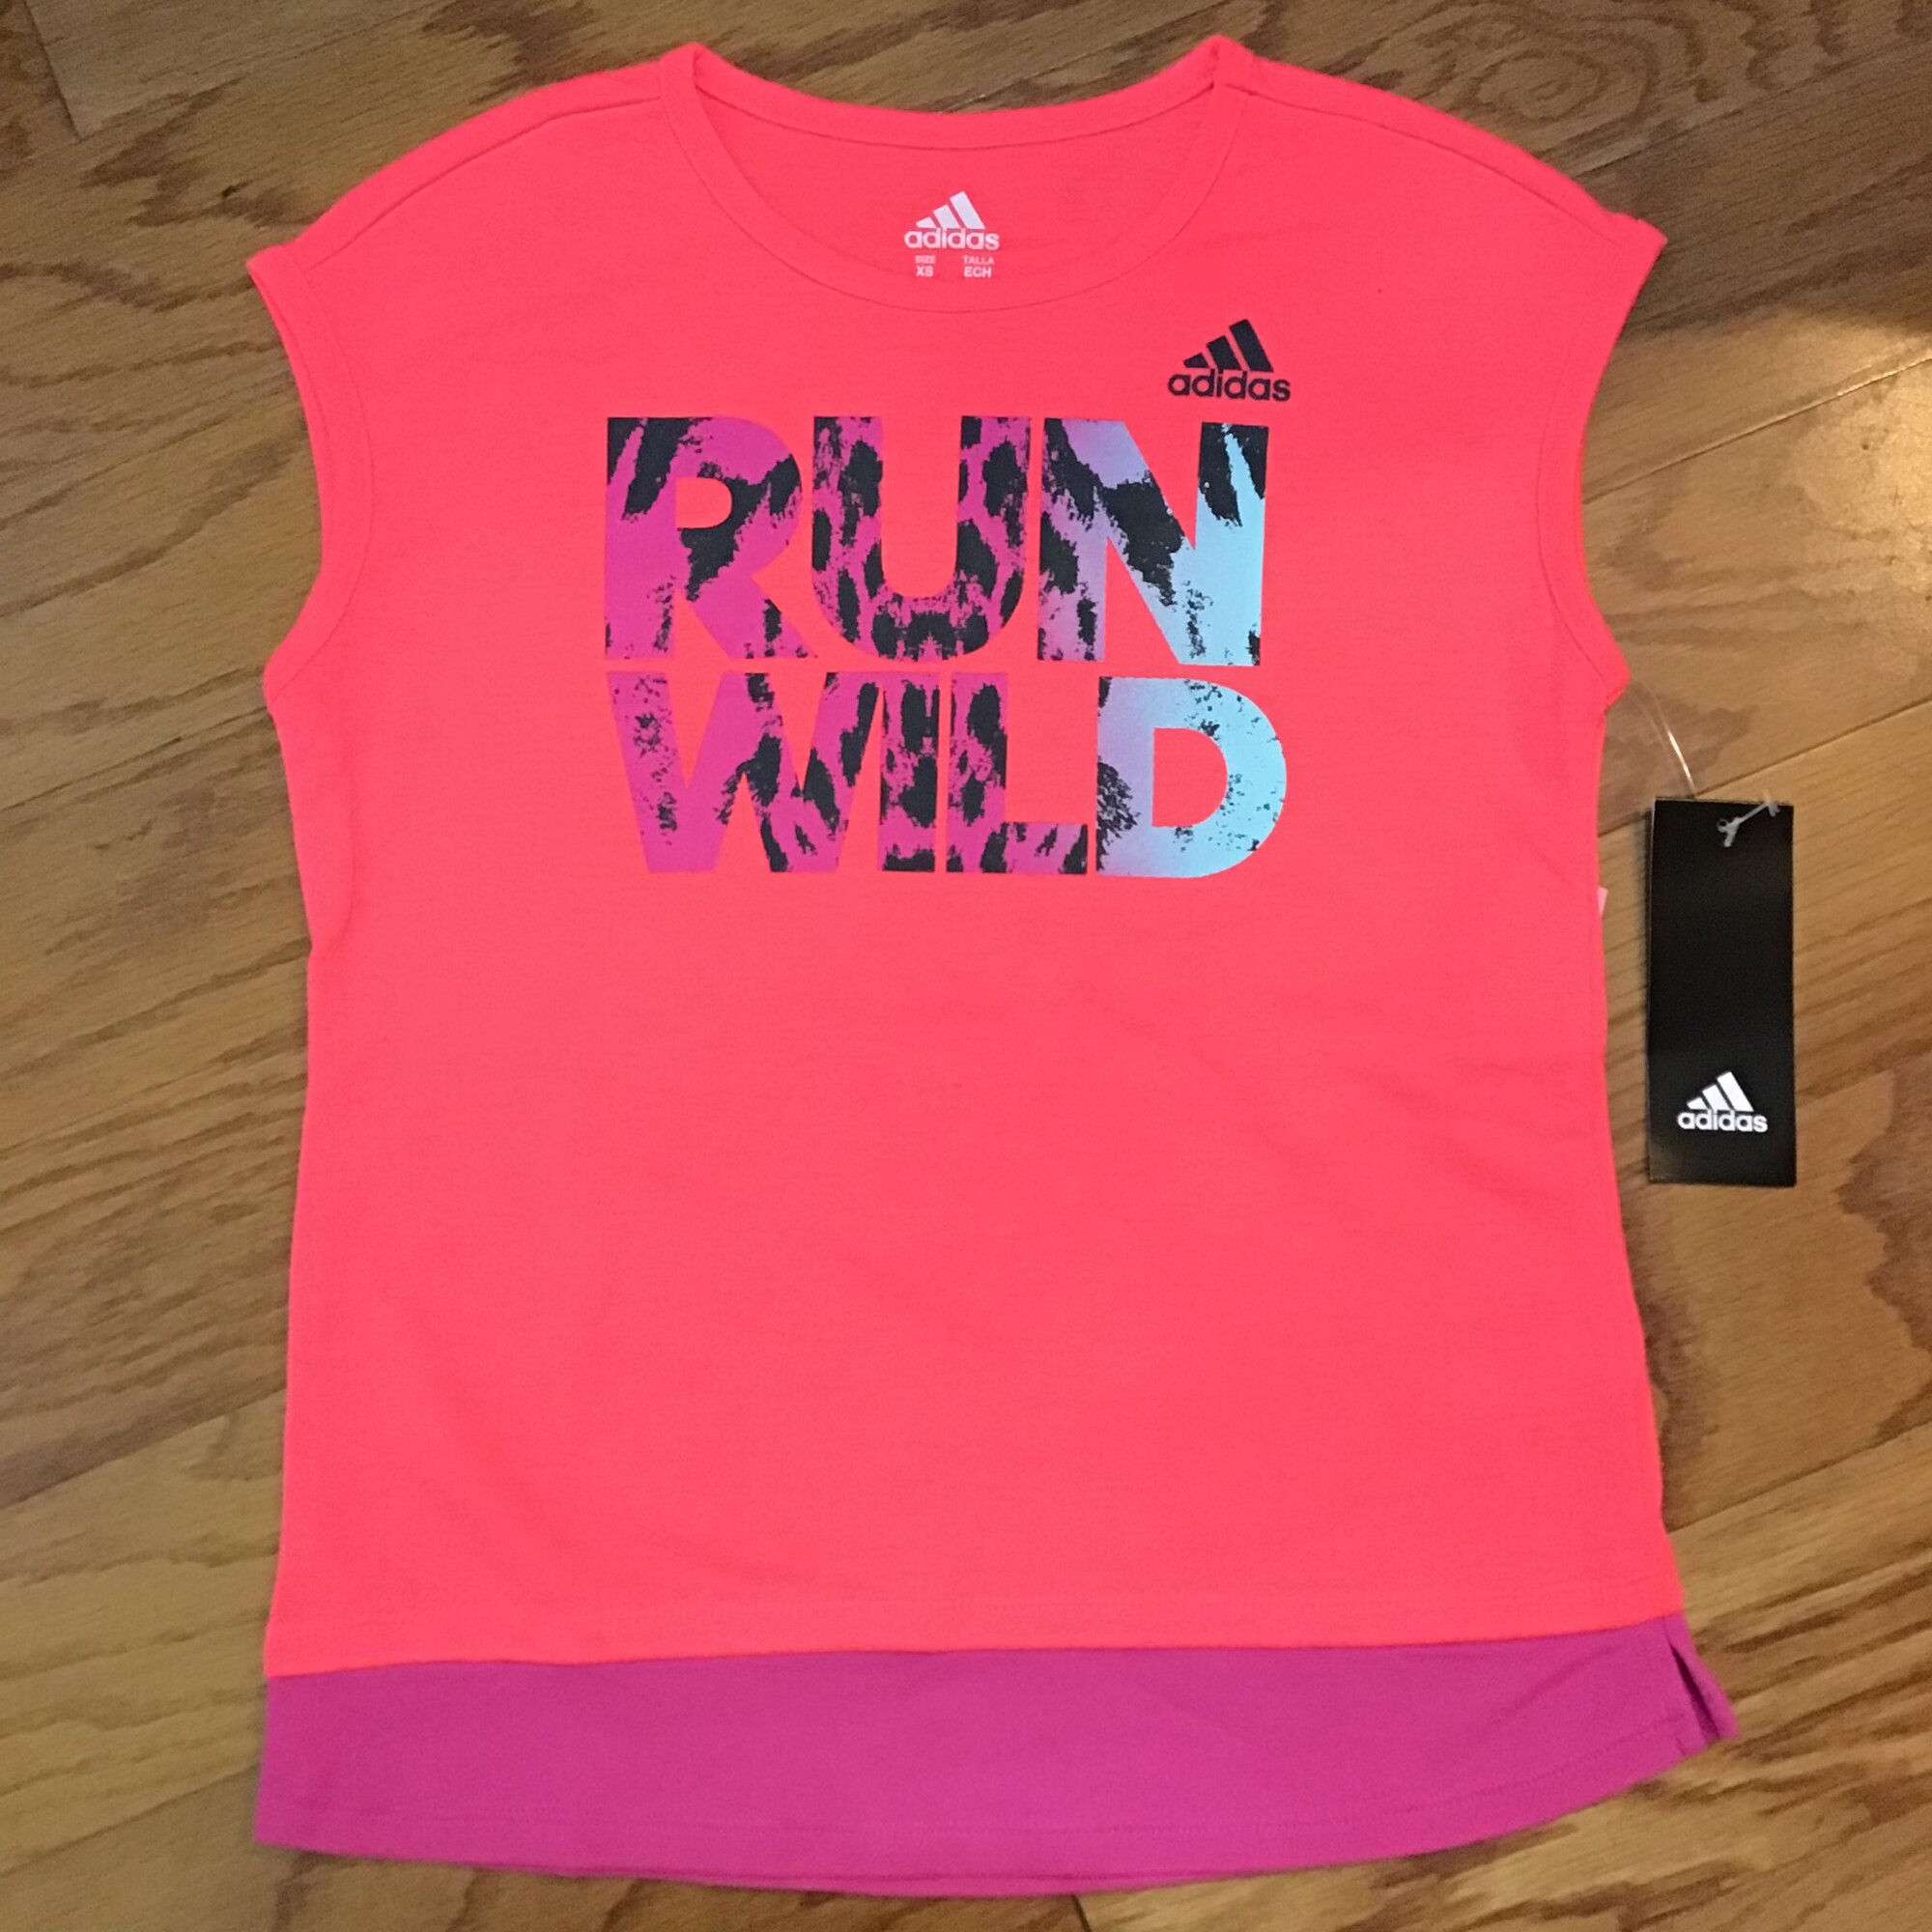 Adidas Shirt NEW, Neon, Size: 8-10

brand new with tag

ALL ONLINE SALES ARE FINAL.
NO RETURNS
REFUNDS
OR EXCHANGES

PLEASE ALLOW AT LEAST 1 WEEK FOR SHIPMENT. THANK YOU FOR SHOPPING SMALL!